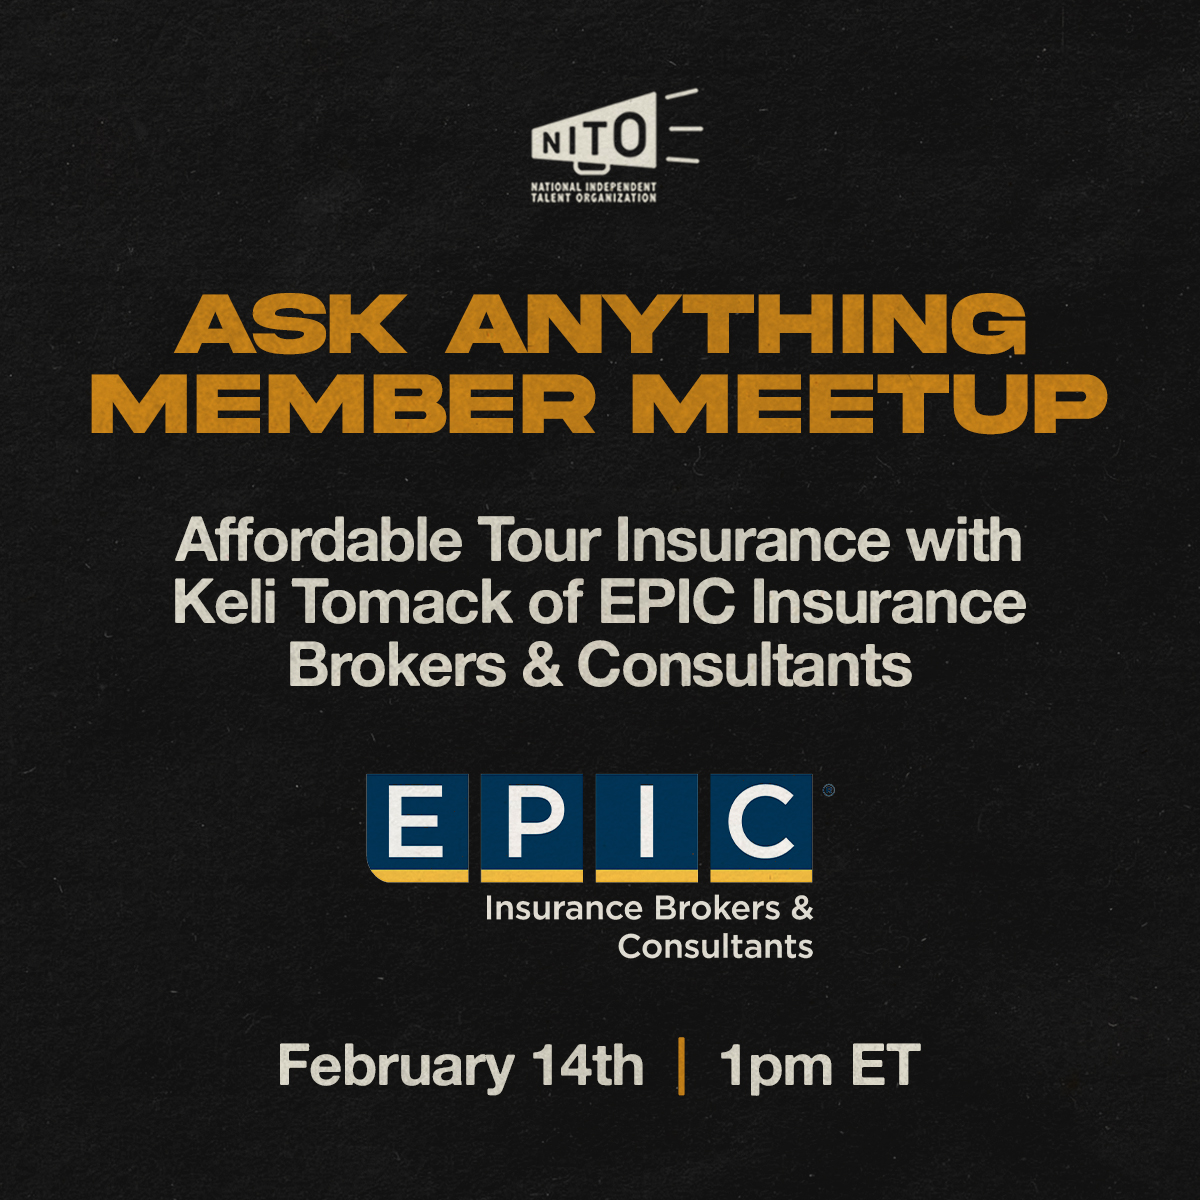 📣 MEMBERS: Our next Ask Anything Member Meetup will take place on Wed, February 14th at 1PM ET and will feature Keli Tomack of @EPIC_Insurance! Keli will join us to discuss the new Independent Artist Tour Insurance Program. Check the latest newsletter for registration info! 📧